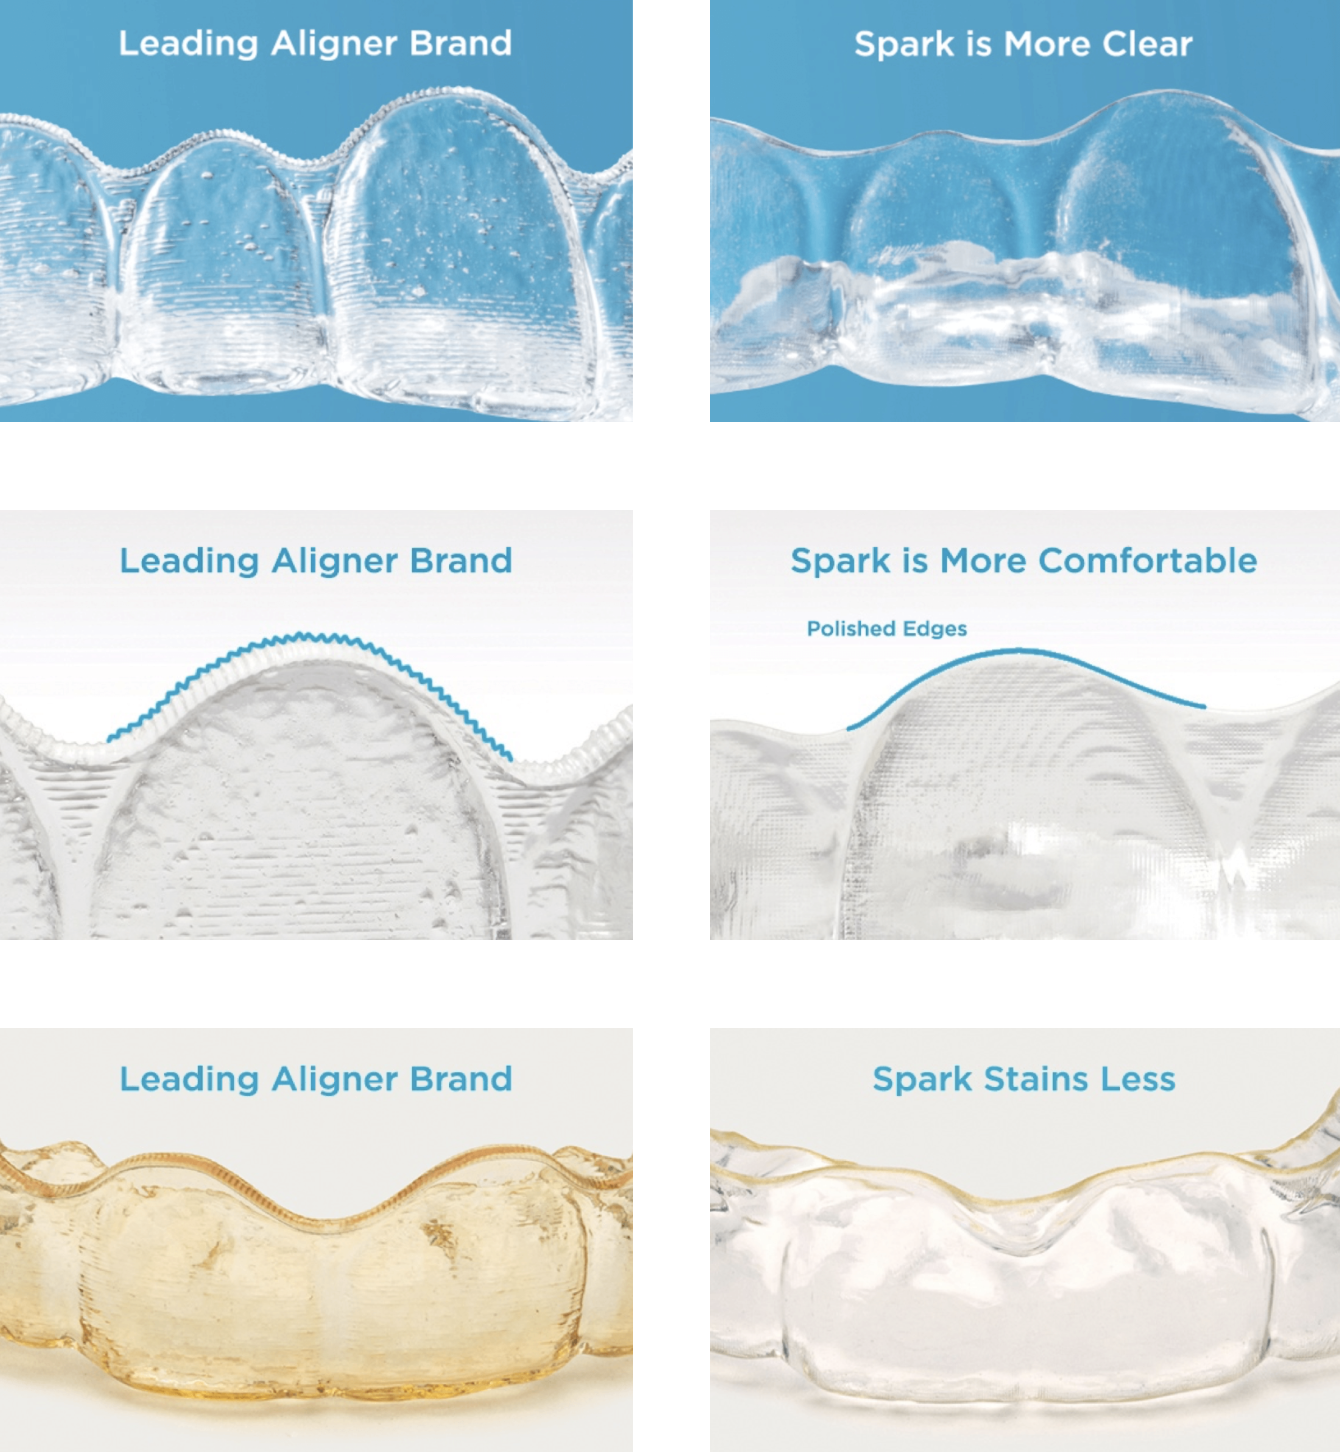 Comparison showing Spark is more clear, more comfortable, and stains less than leading aligner